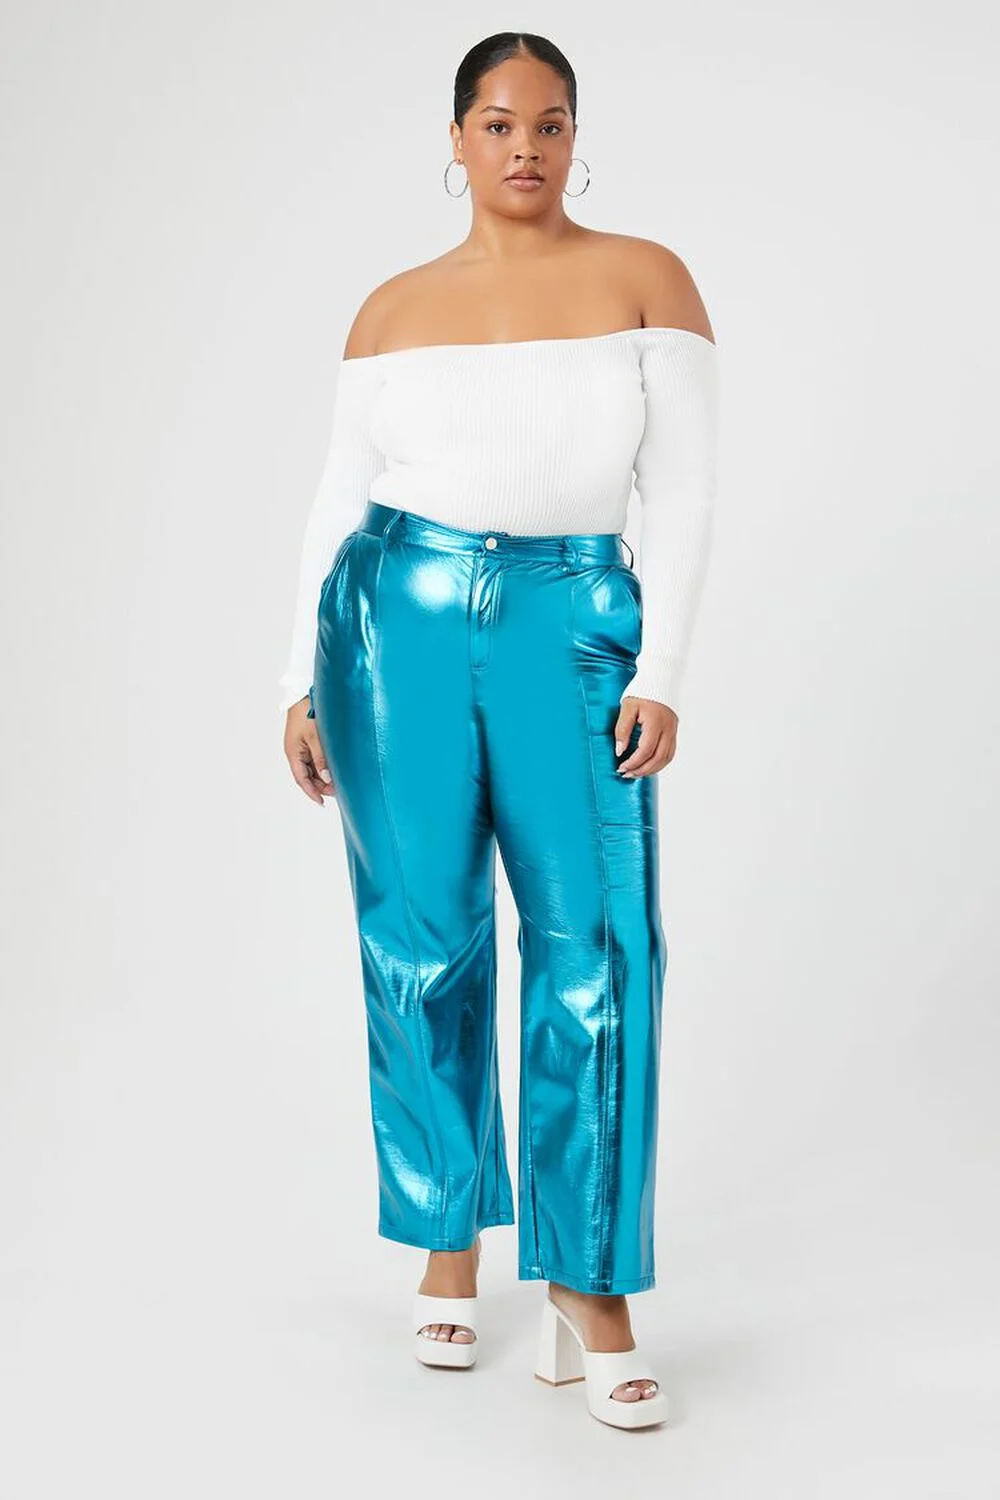 7 Metallic Jeans That Will Make You the Star of the Holiday Party - 21Ninety